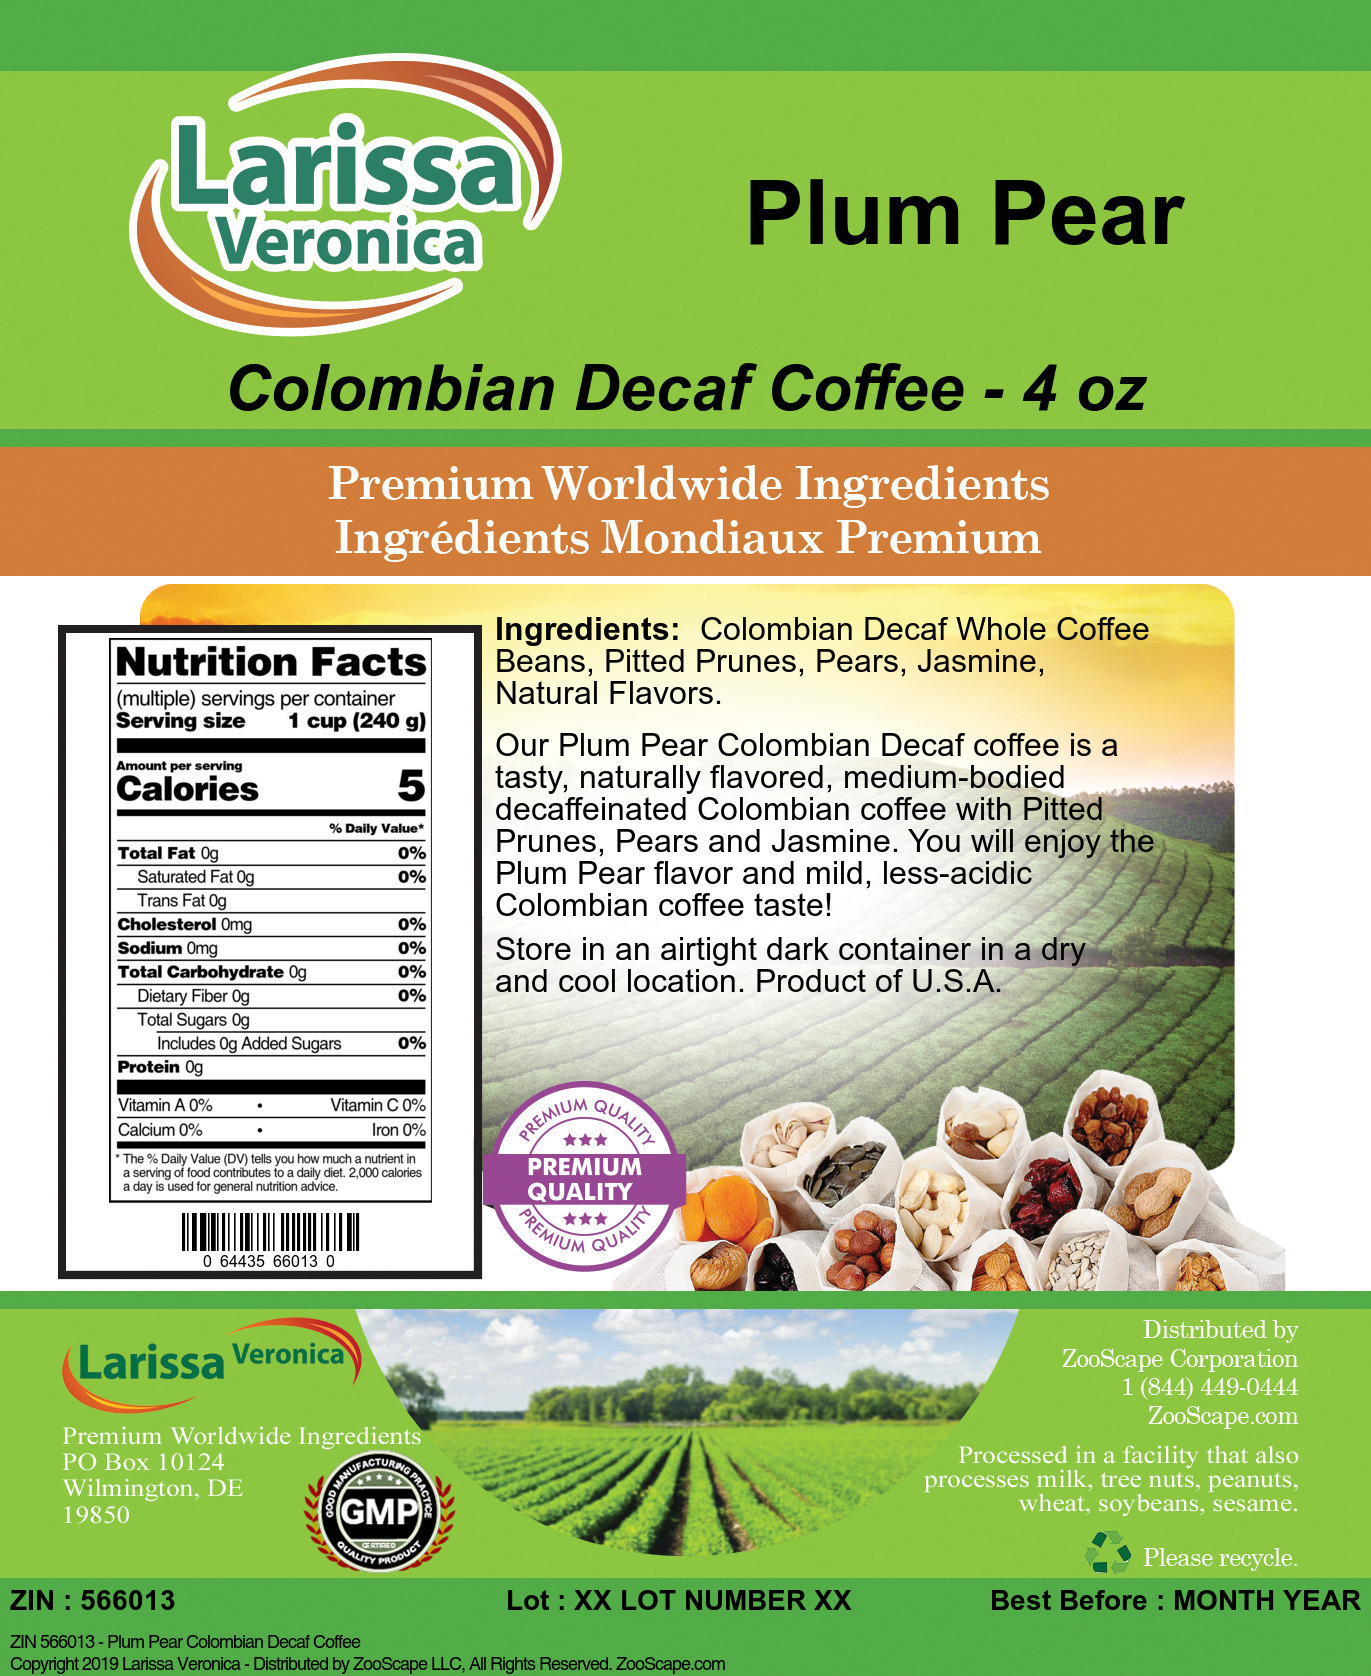 Plum Pear Colombian Decaf Coffee - Label